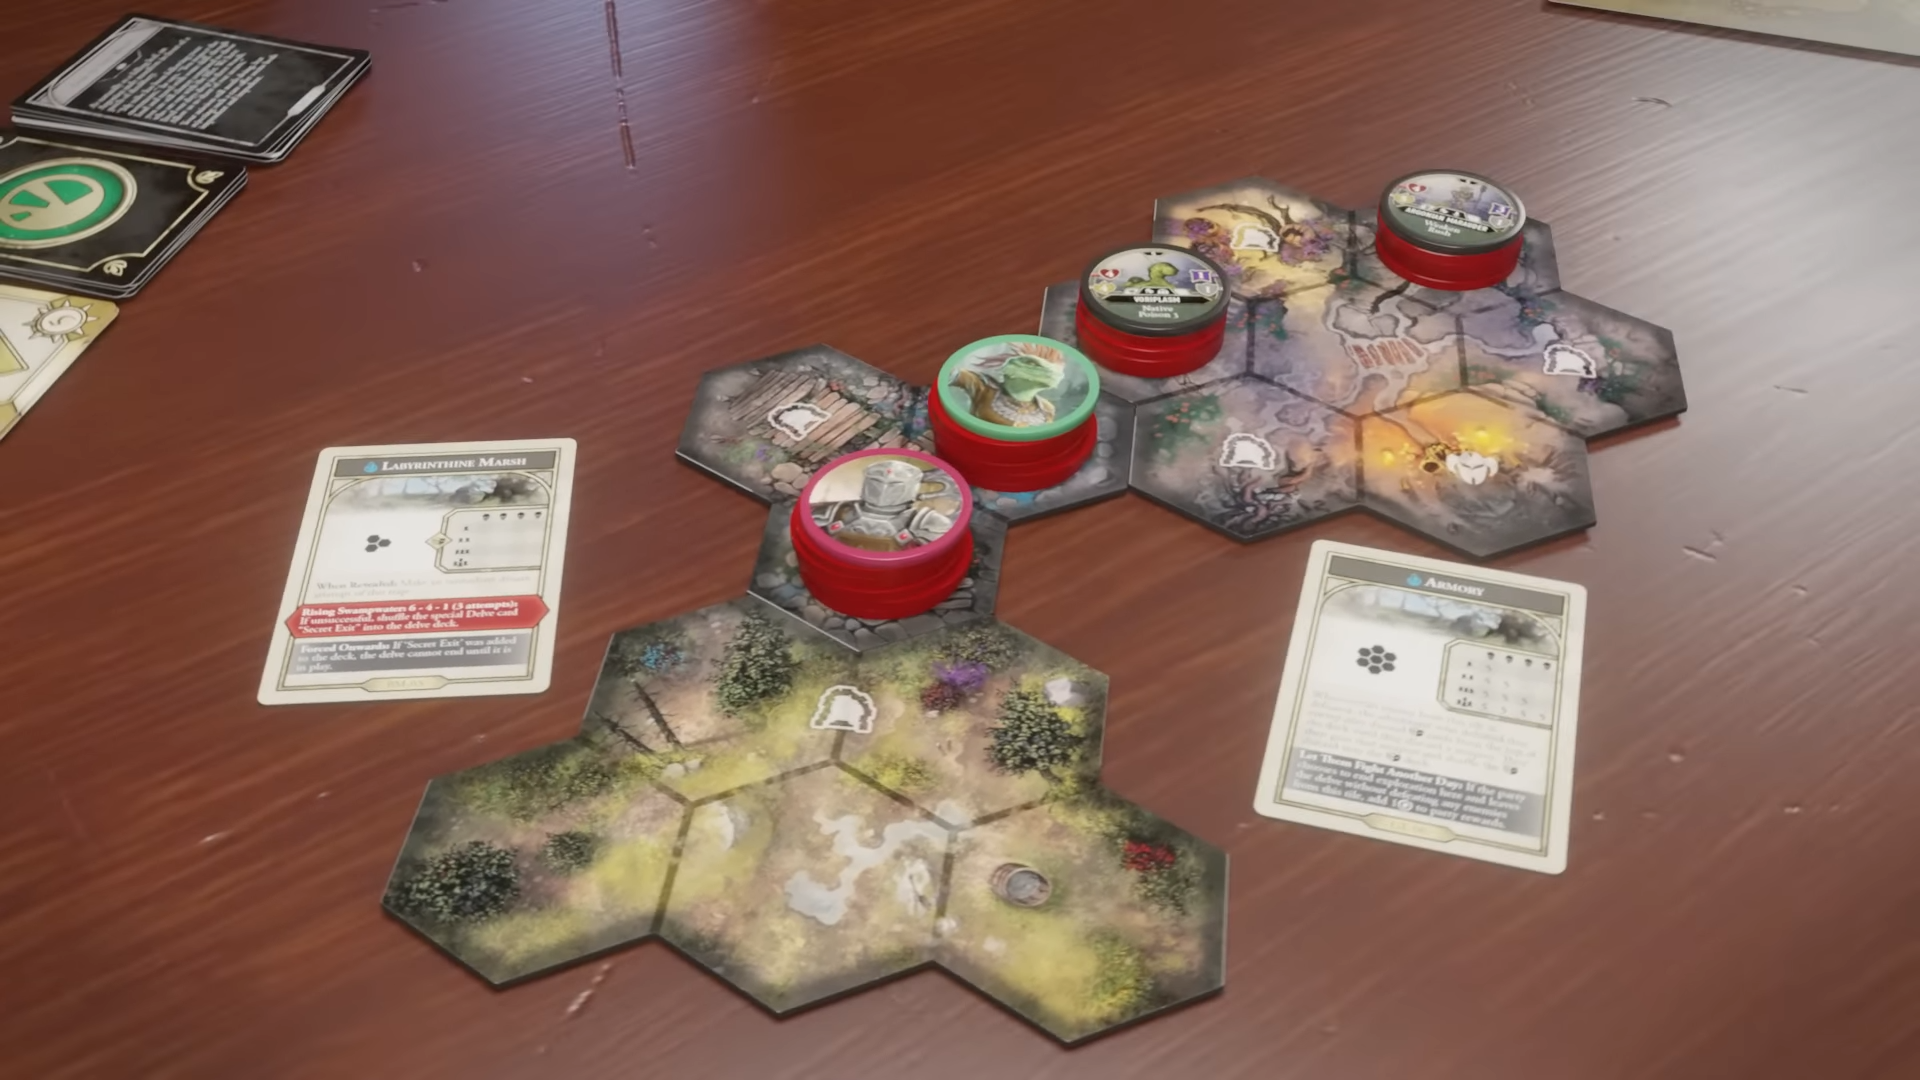 Image for Too Many Bones maker’s The Elder Scrolls board game is a more digestible Gloomhaven experience